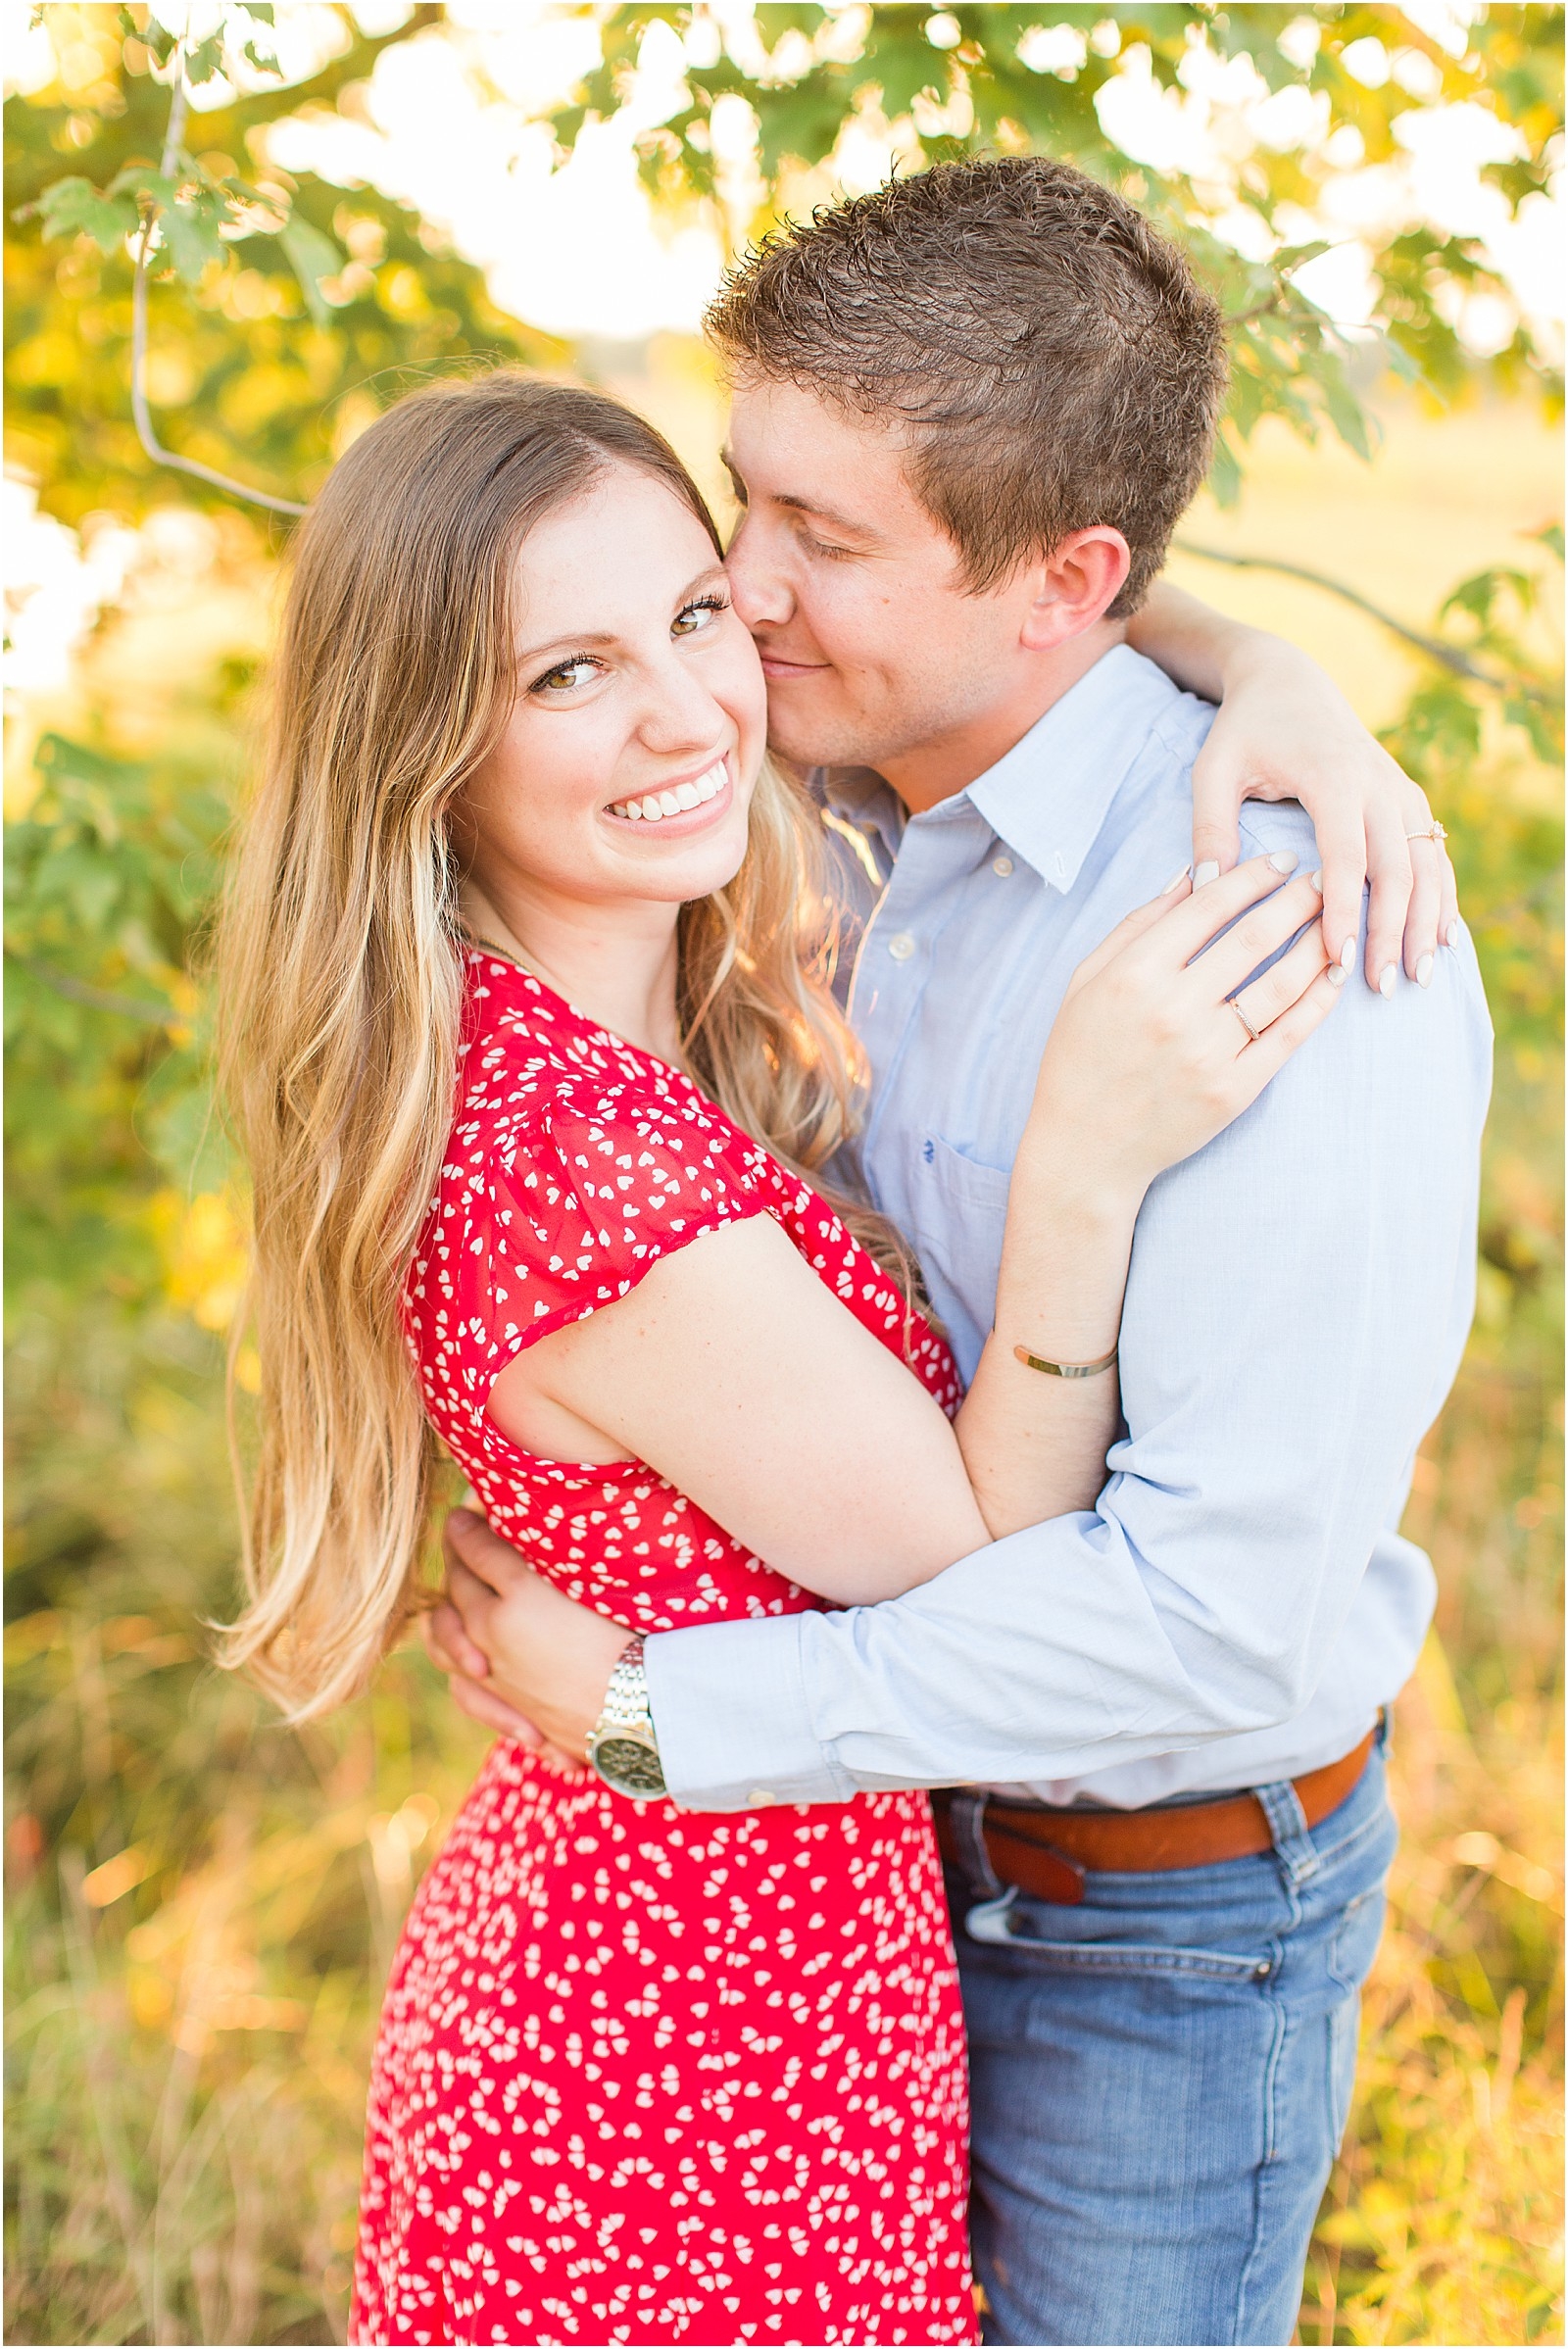 A Jasper Indiana Engagement Session | Tori and Kyle | Bret and Brandie Photography039.jpg